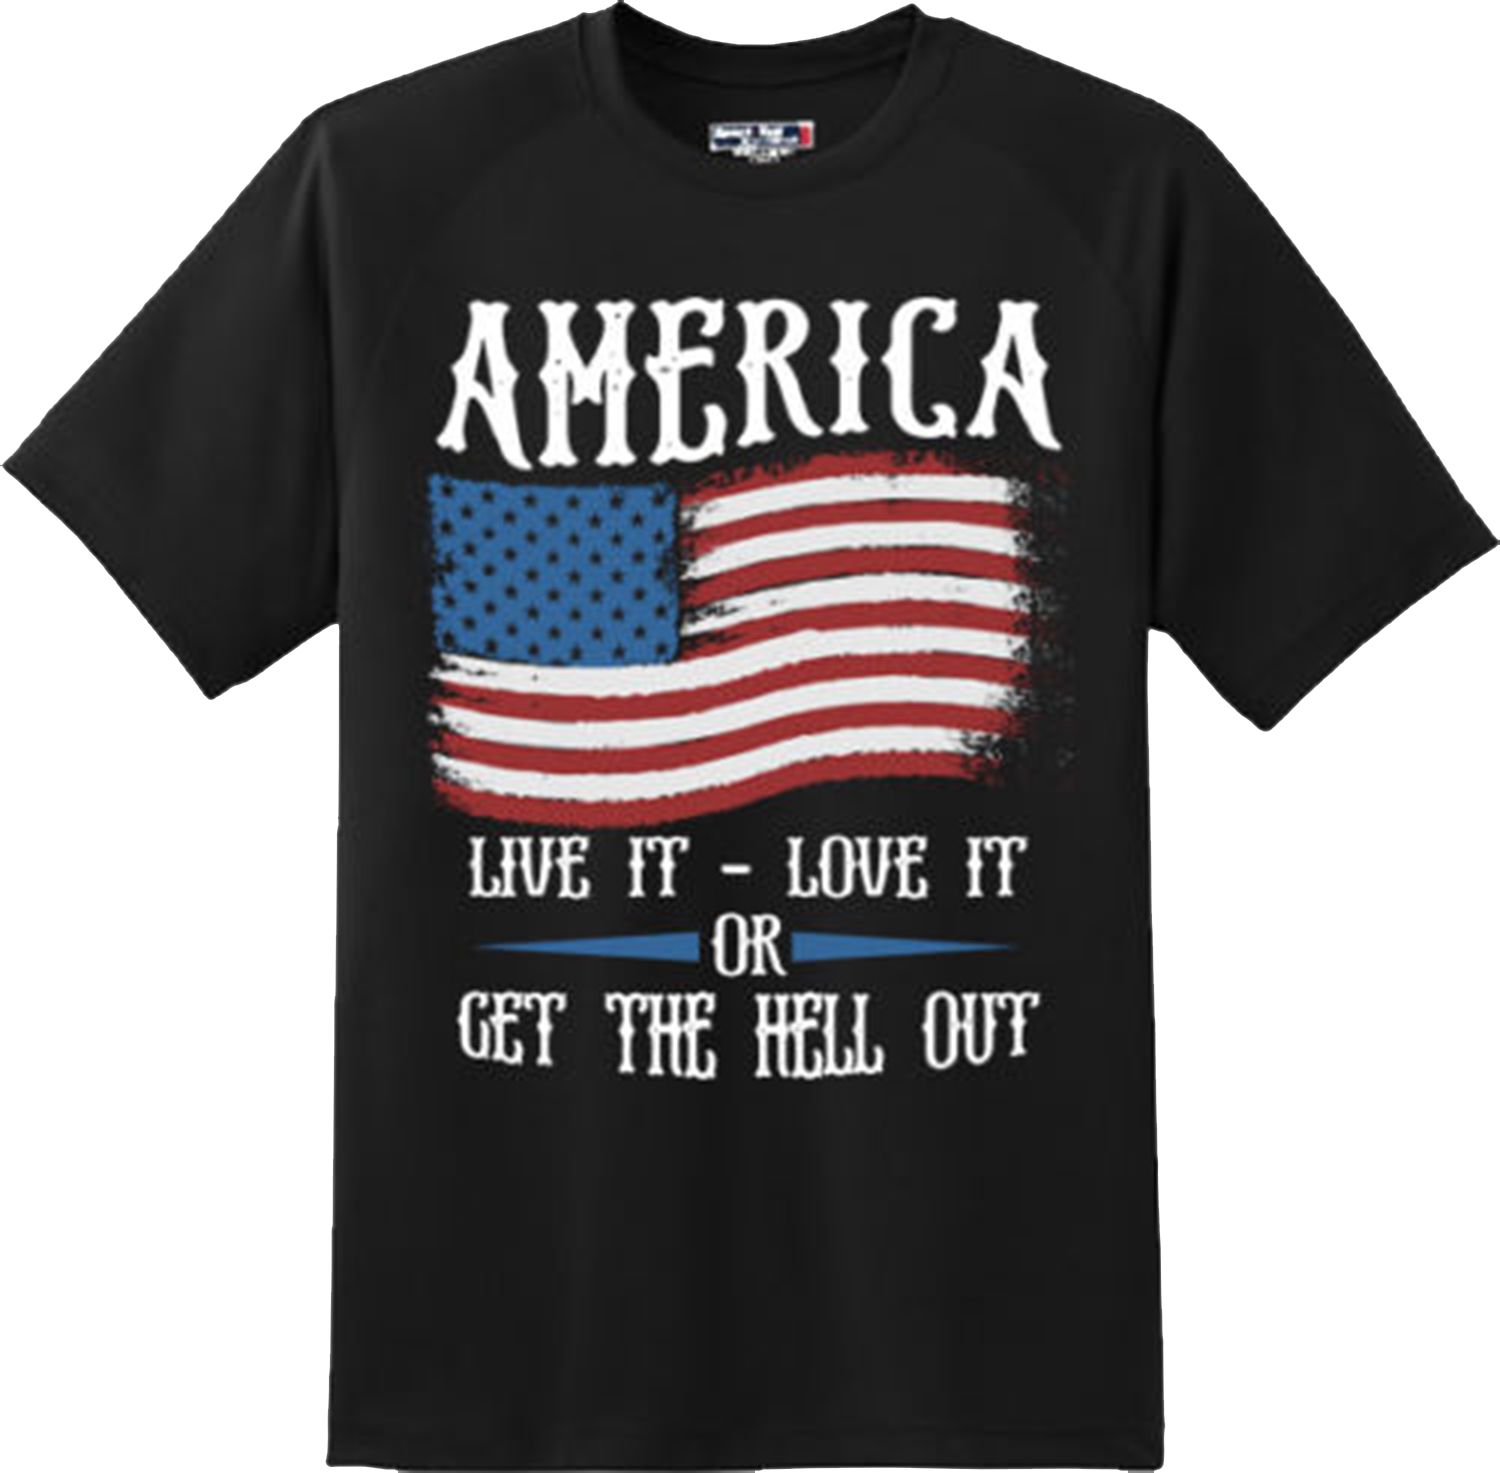 Get the hell out American Patriotic Freedom T Shirt New Graphic Tee